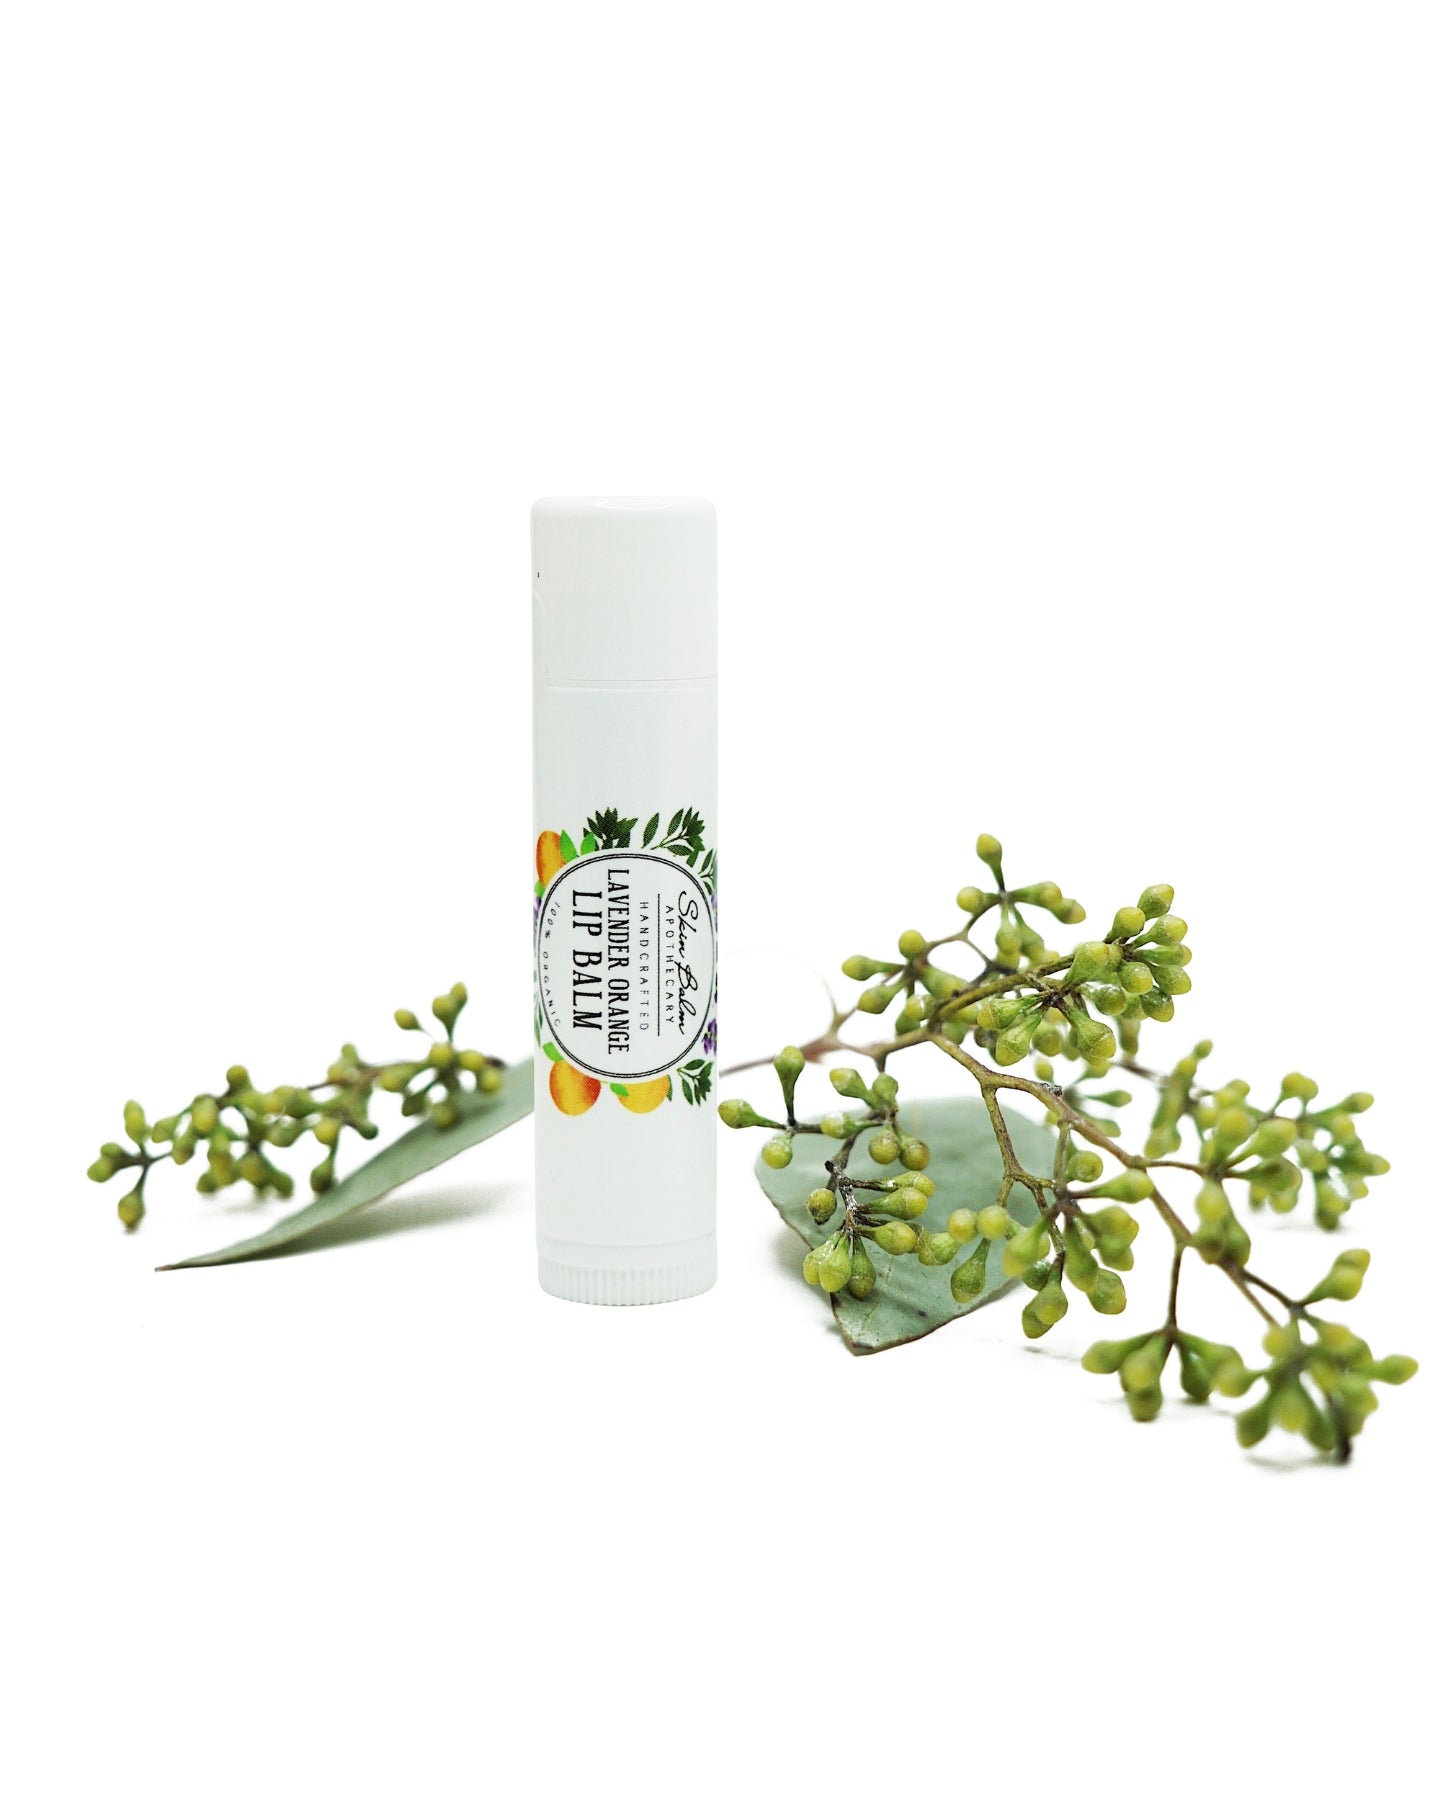 Lavender Orange Lip Balm with green foliage against a white background.